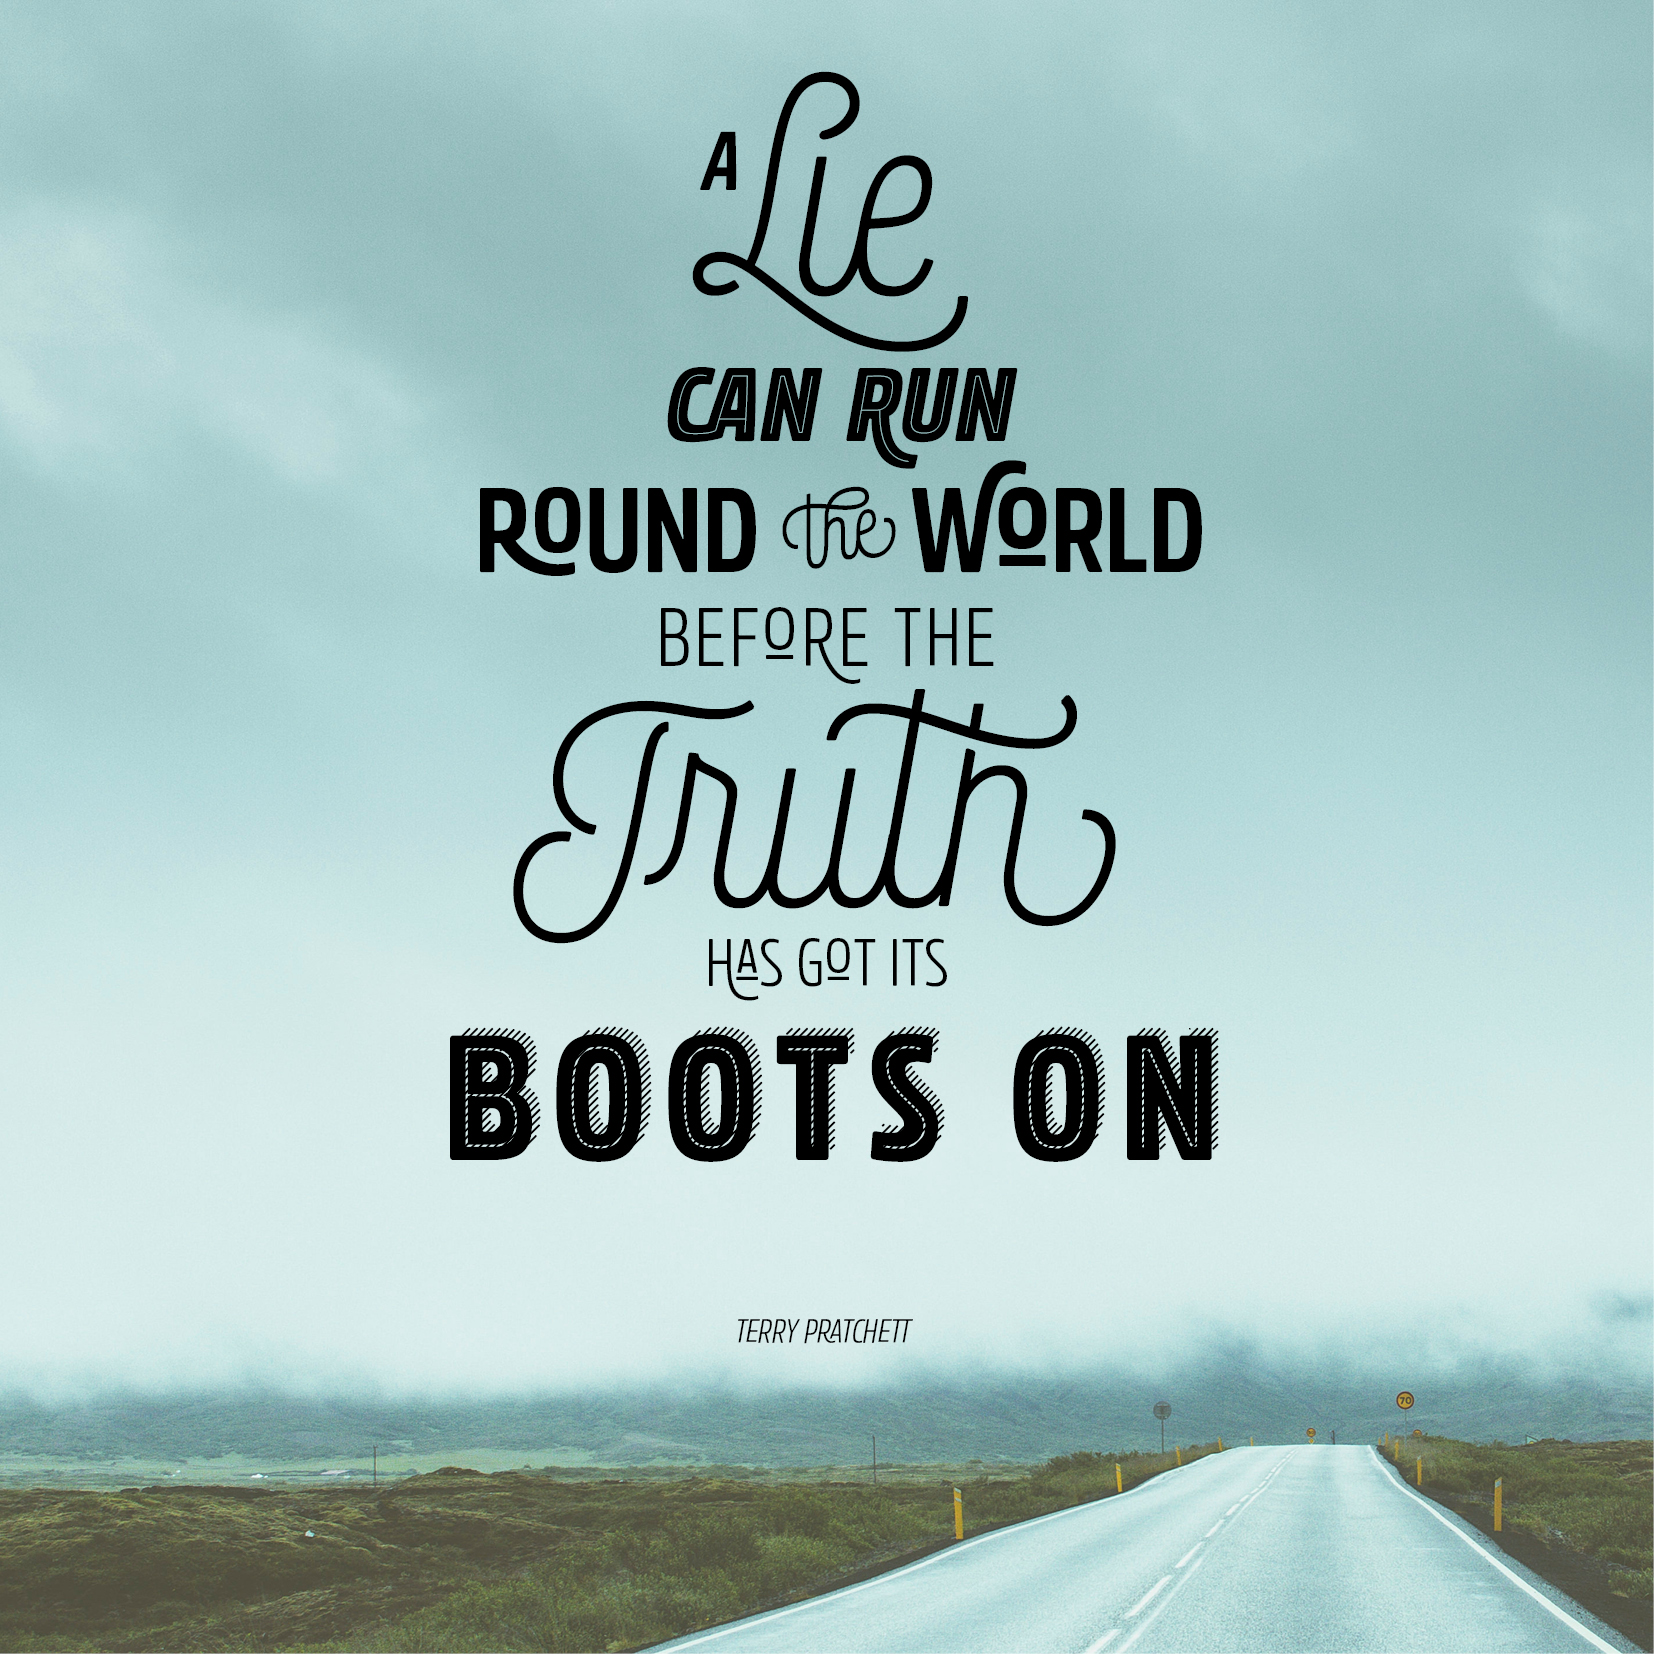 terry pratchett quote set in rockeby font family